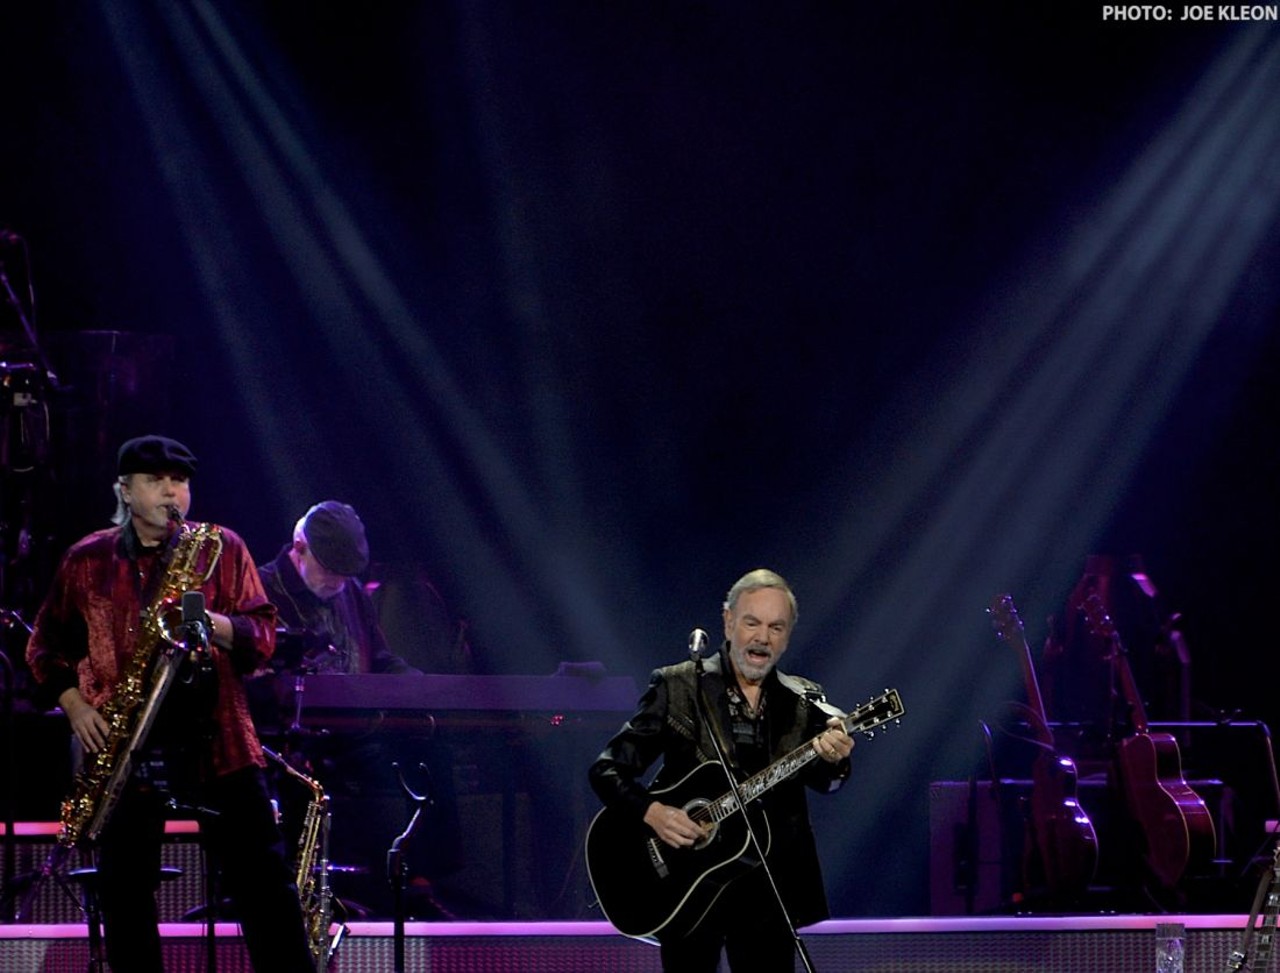 Neil Diamond Performing at the Q